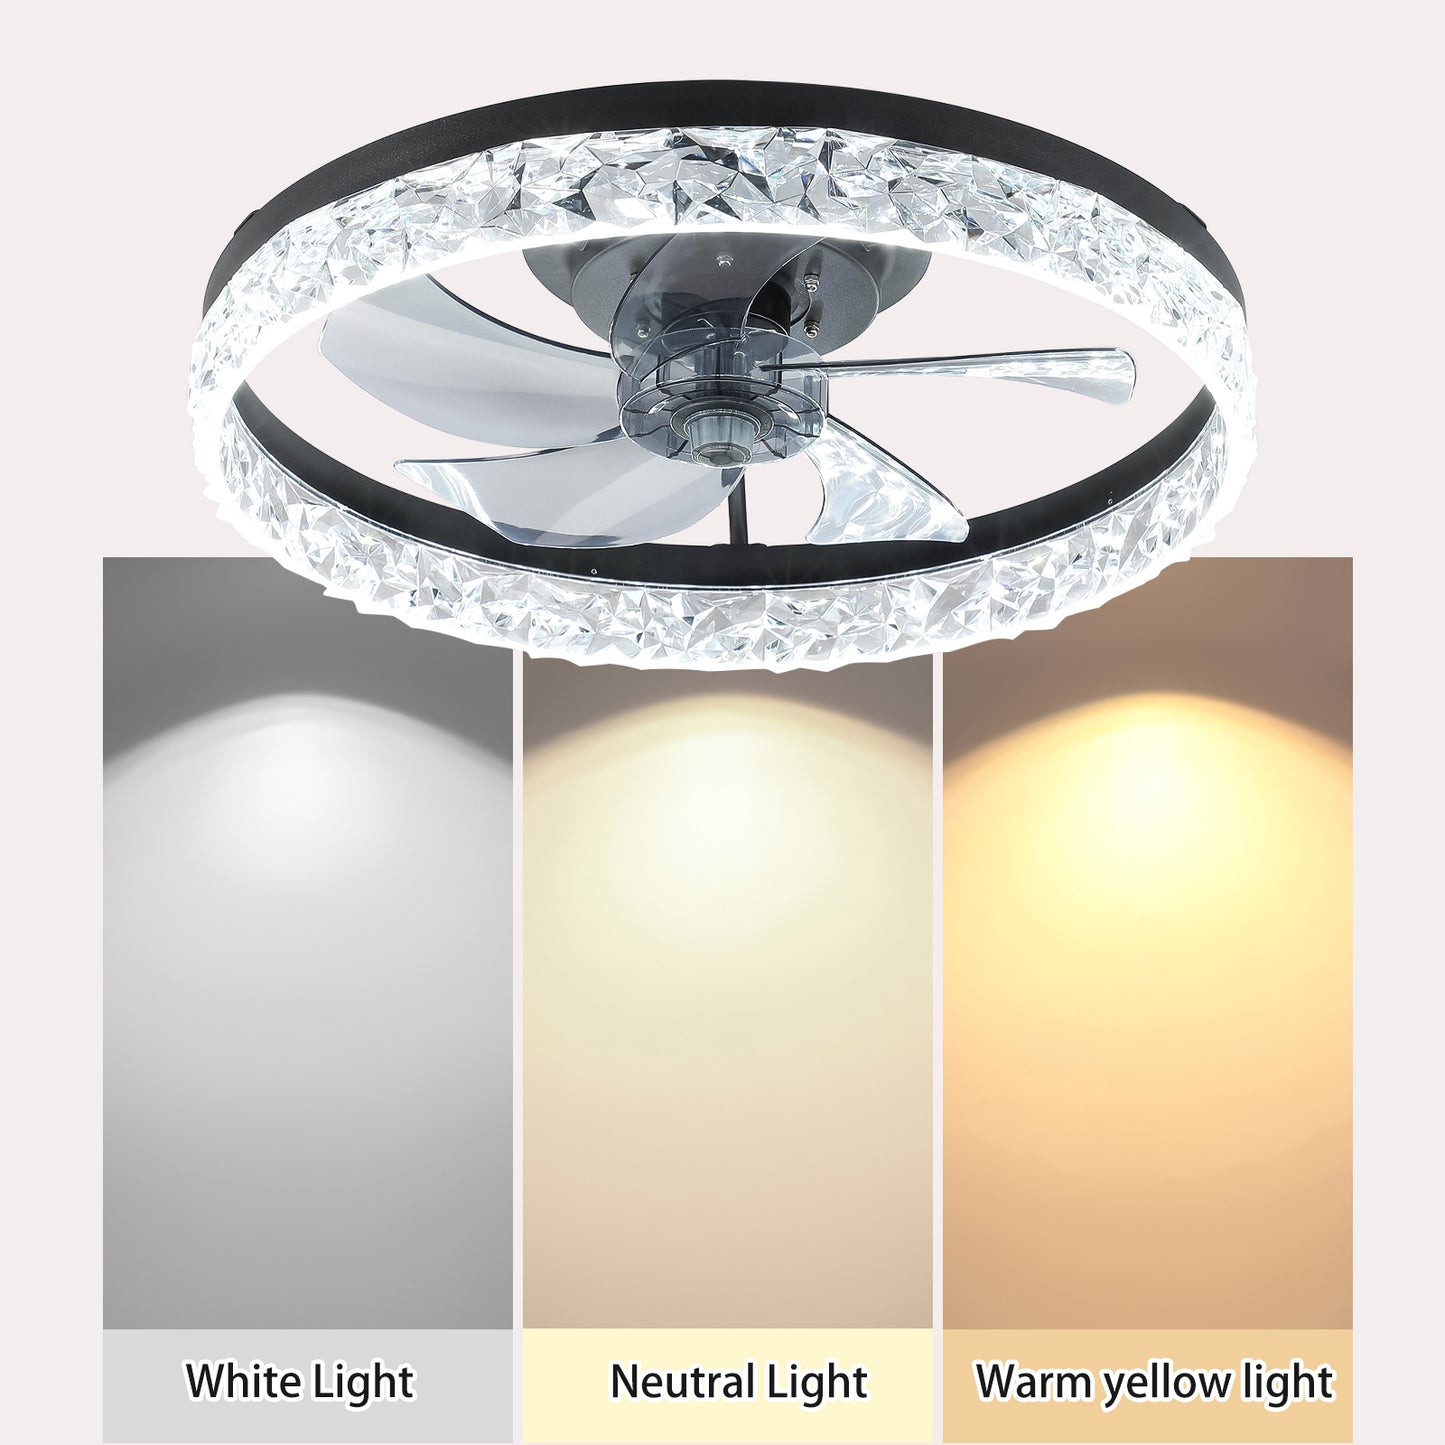 Dimmable LED Ceiling Fan with Modern Acrylic Design